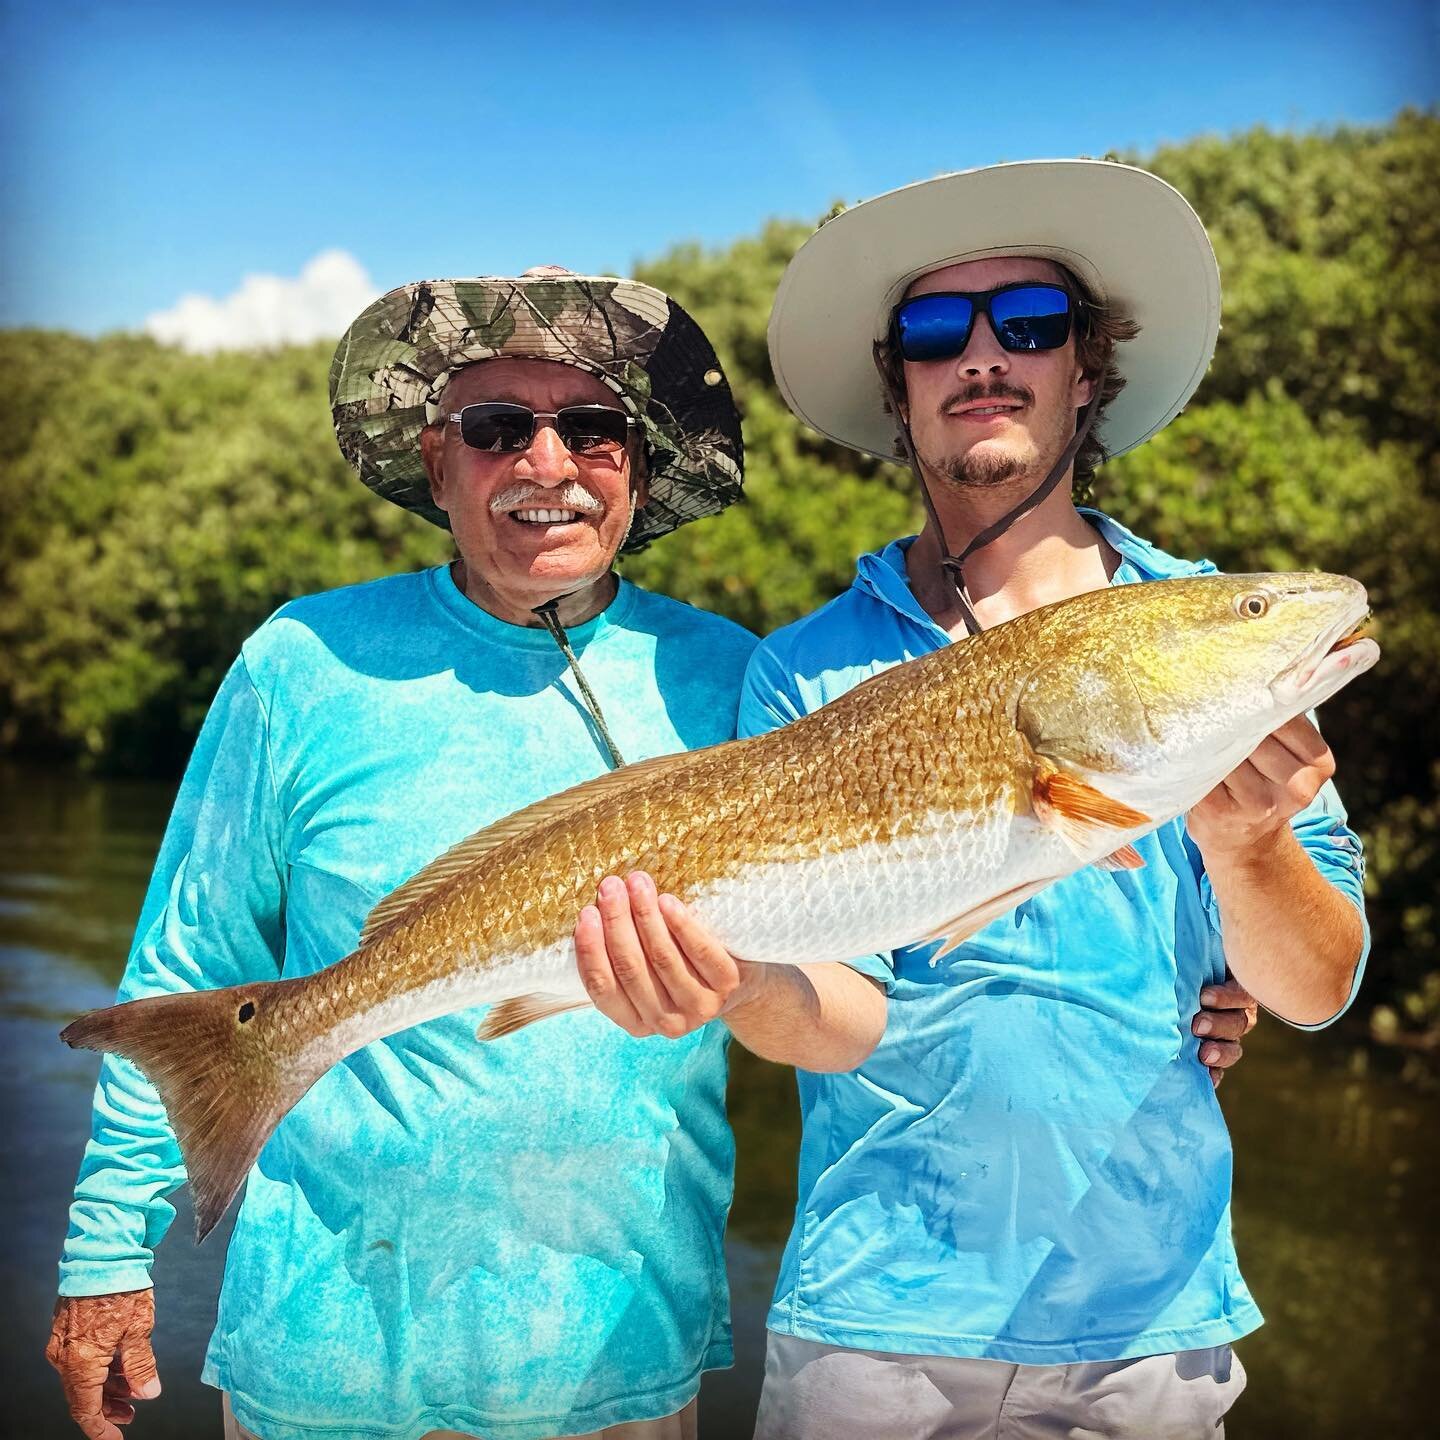 Found some big one this afternoon. The tides was slow but the bit was good. #crystalriver #captjameskerr
#crystalriverflatsfishing #fishing #naturecoast #seatrout #snook  #visitflorida #sodiumfishinggear #crystalriverfishing #inshorefishing #redfish 